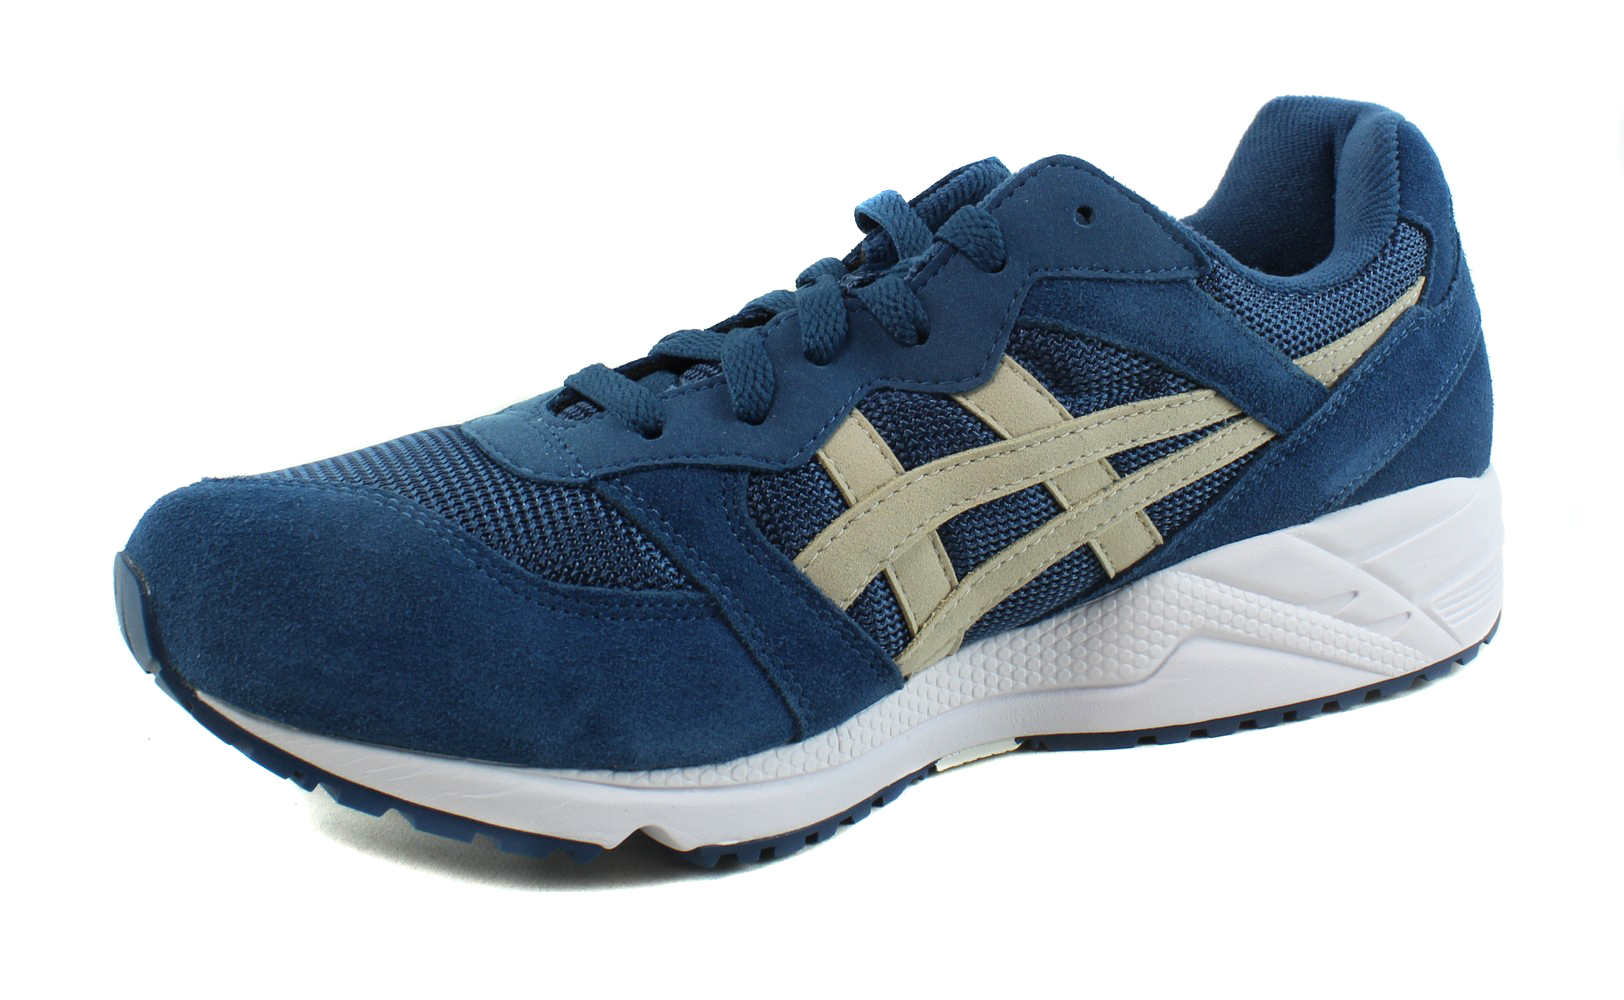 ASICS Mens Gel-Lique Suede Running Casual Sneaker Shoes - image 2 of 4